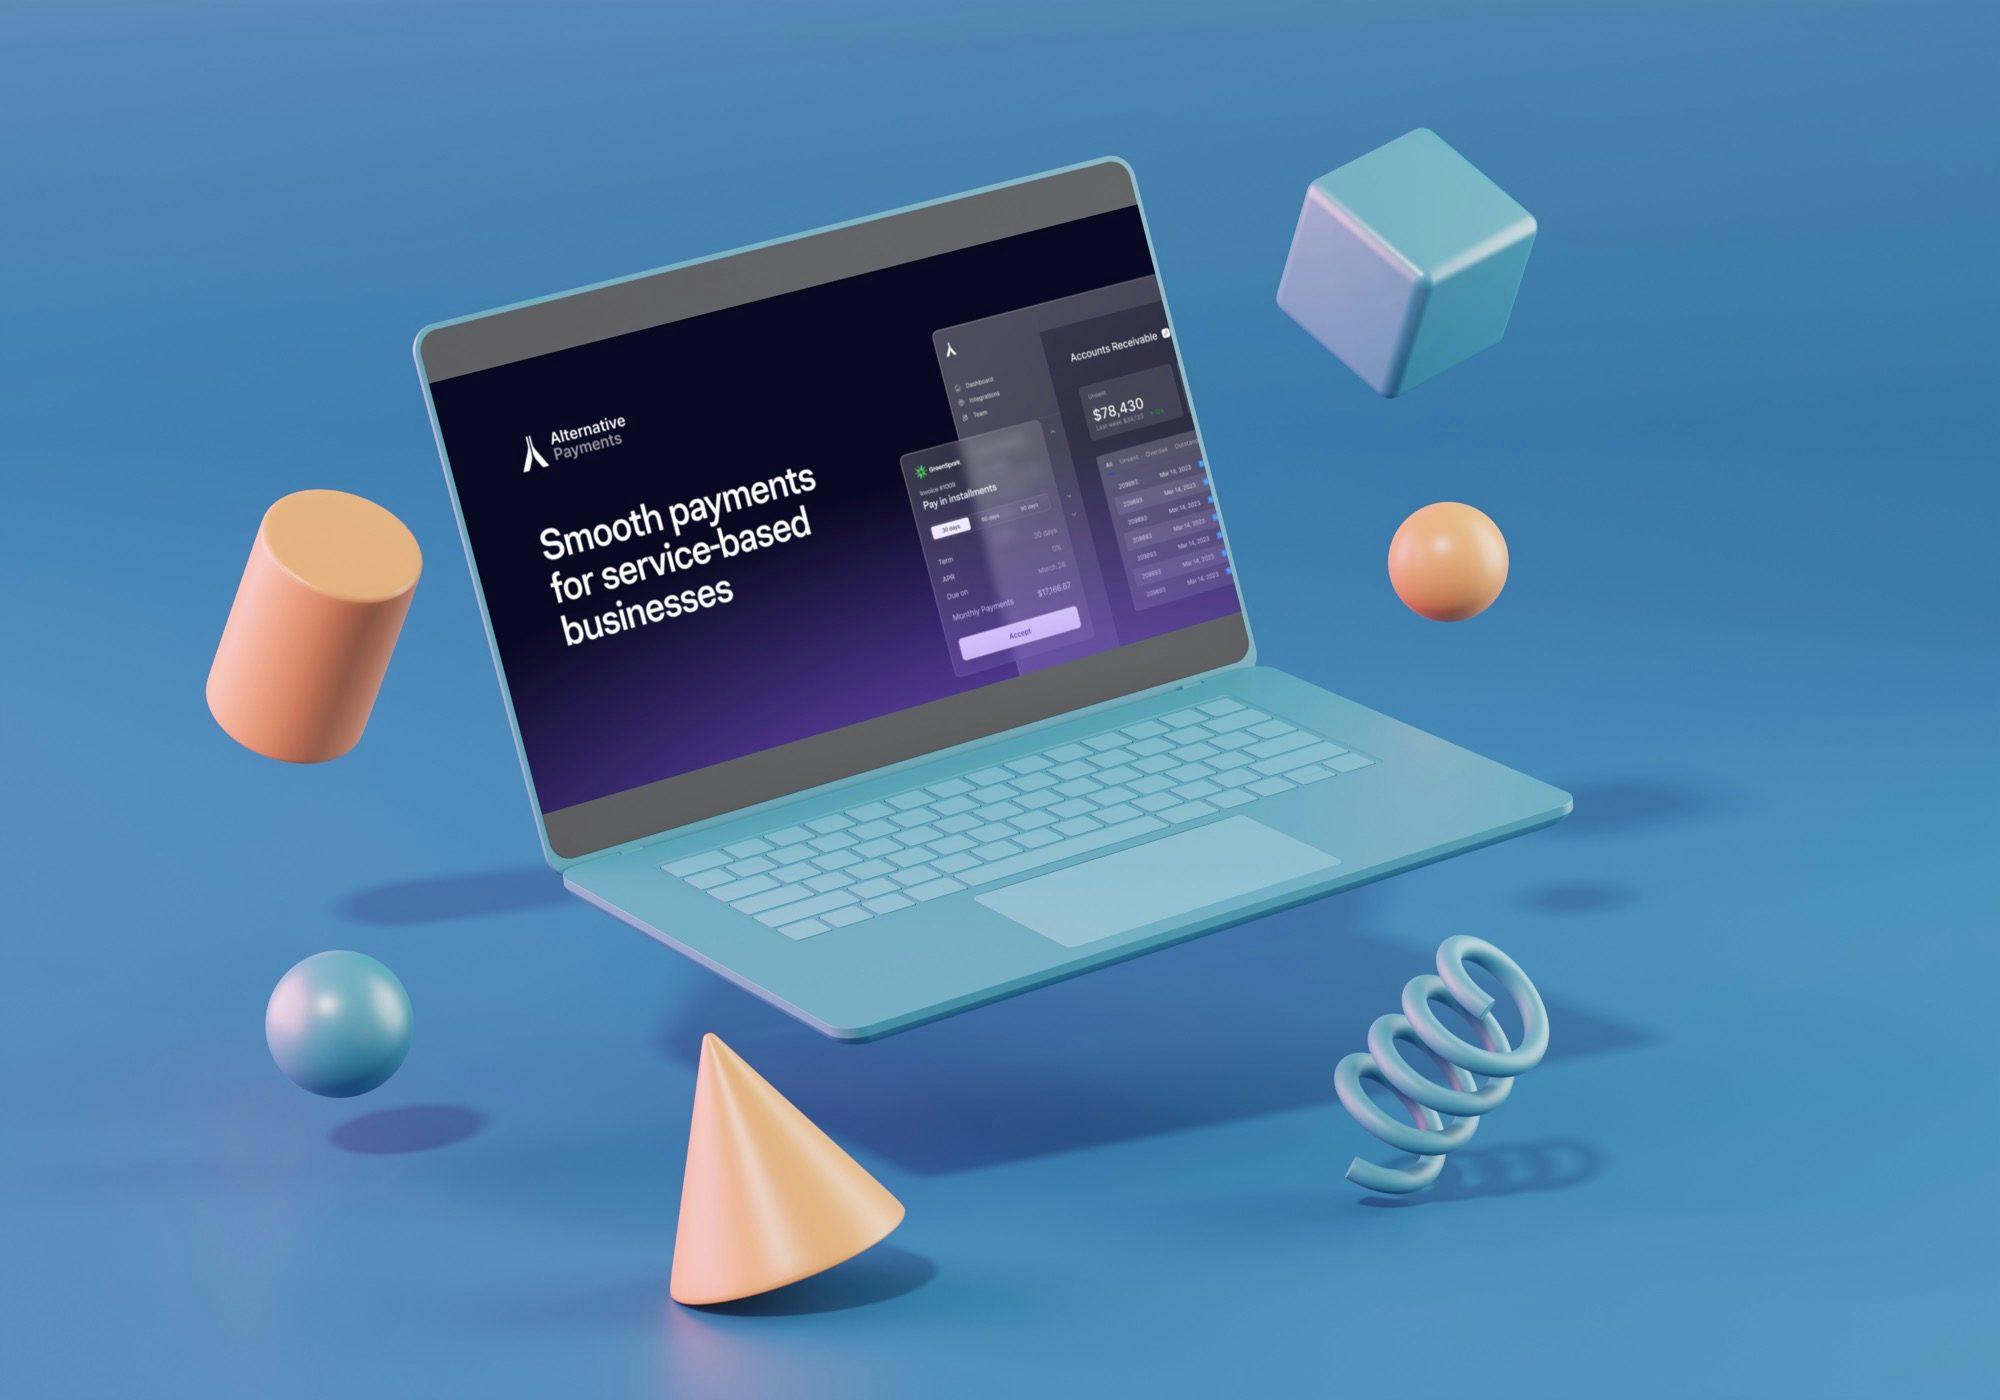 A 3D digital rendering of a laptop computer accompanied by different 3D accents and shapes. On the computer itself is the homepage for the Alternative Payments website.